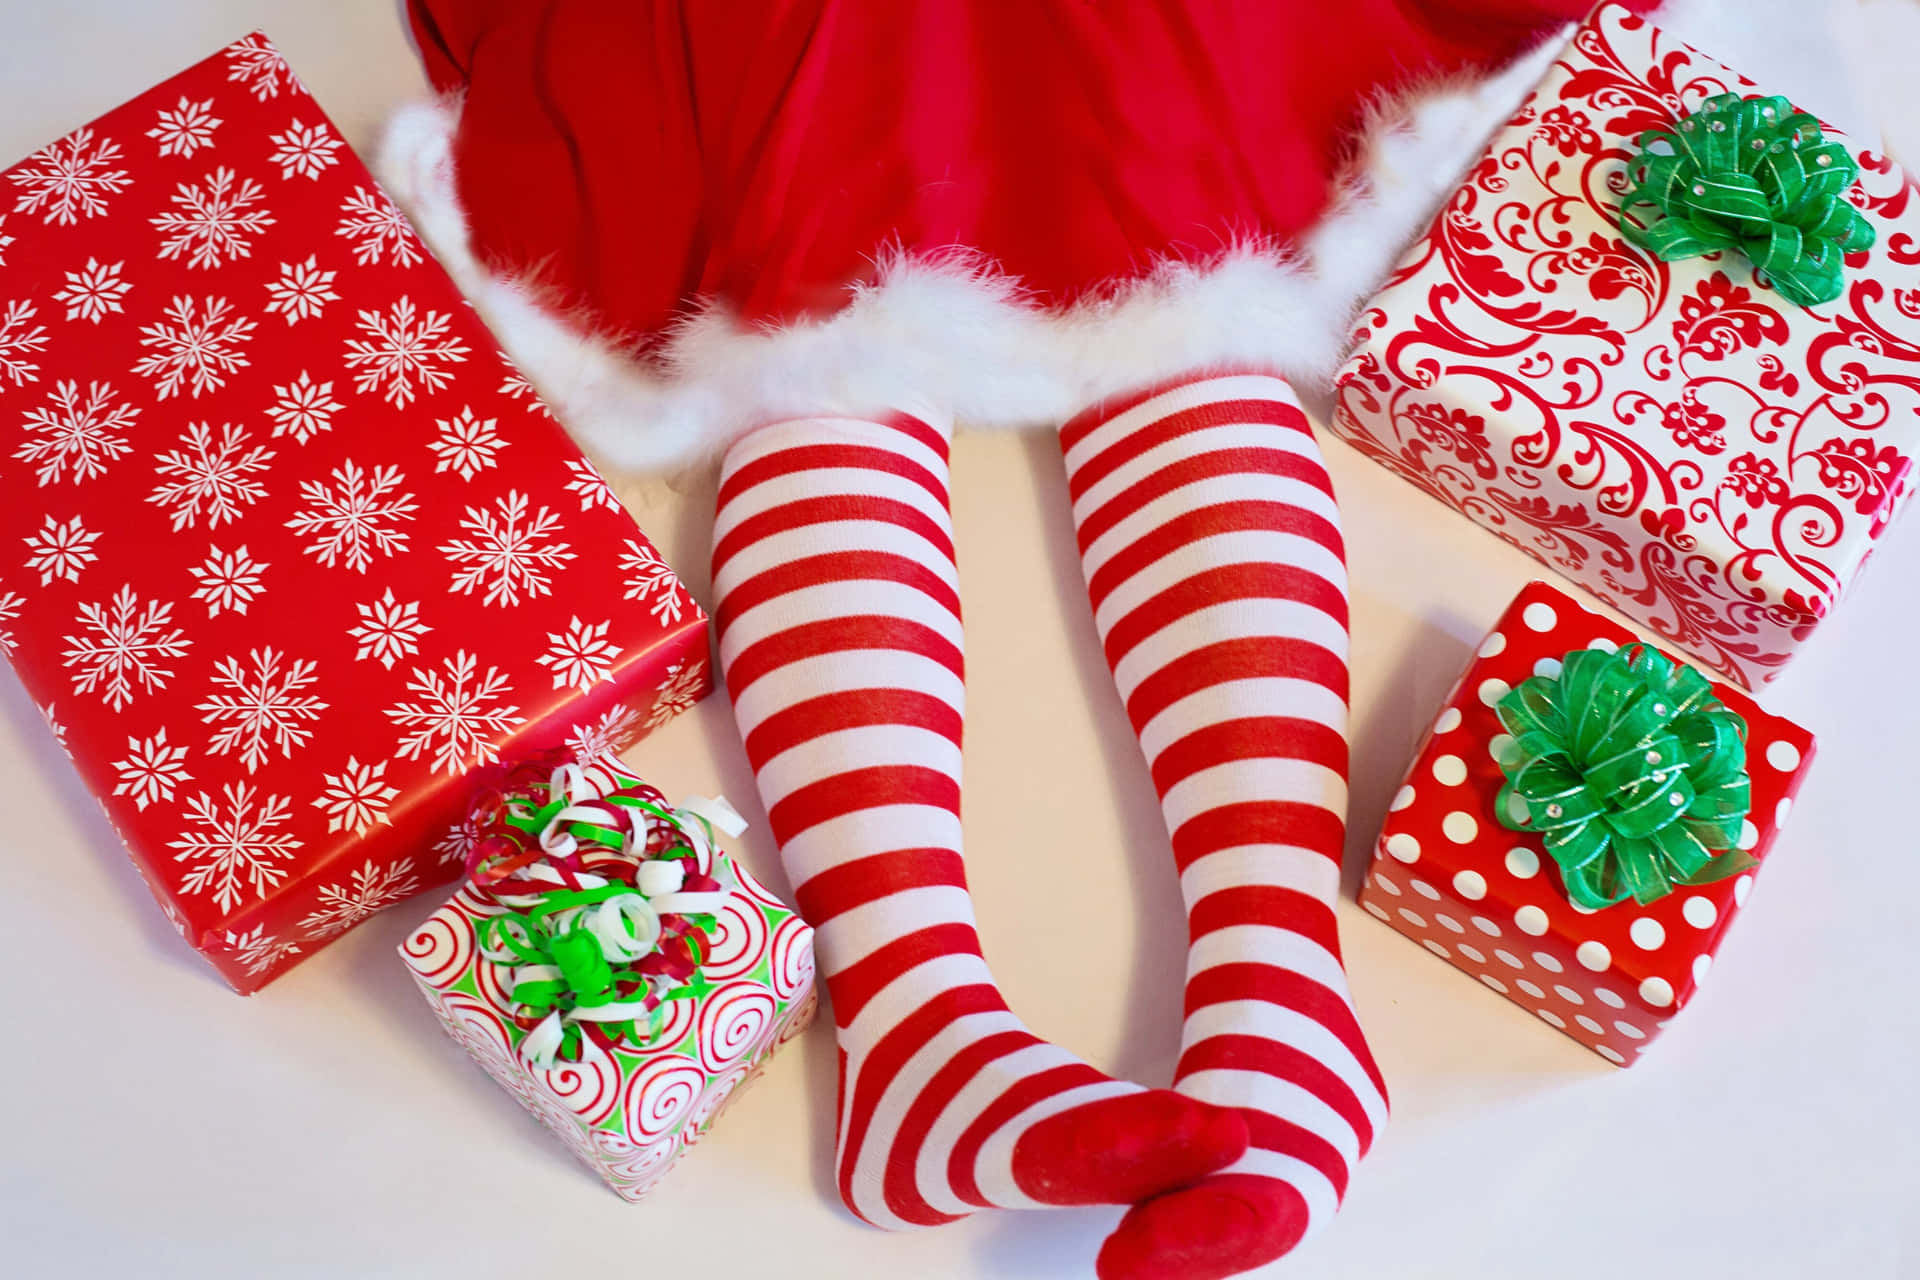 Santa Striped Legs With Gifts.jpg Wallpaper